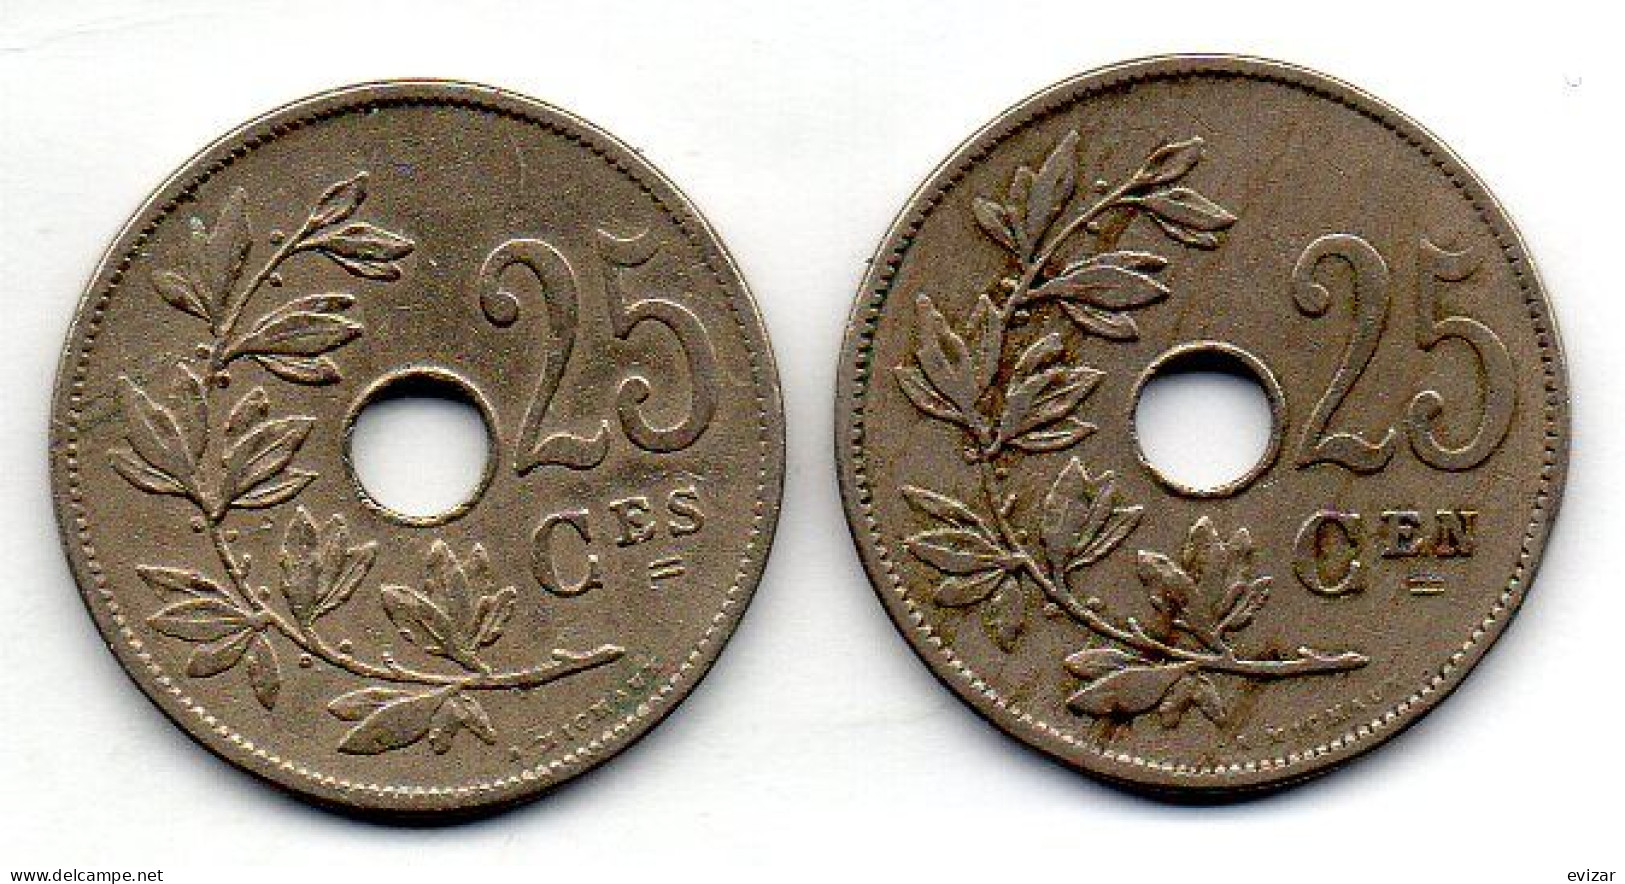 BELGIUM - Set Of Two Coins 25 Centimes, Copper-Nickel, Year 1909, 1908, KM # 62, 63, French & Dutch Legend - 25 Cents